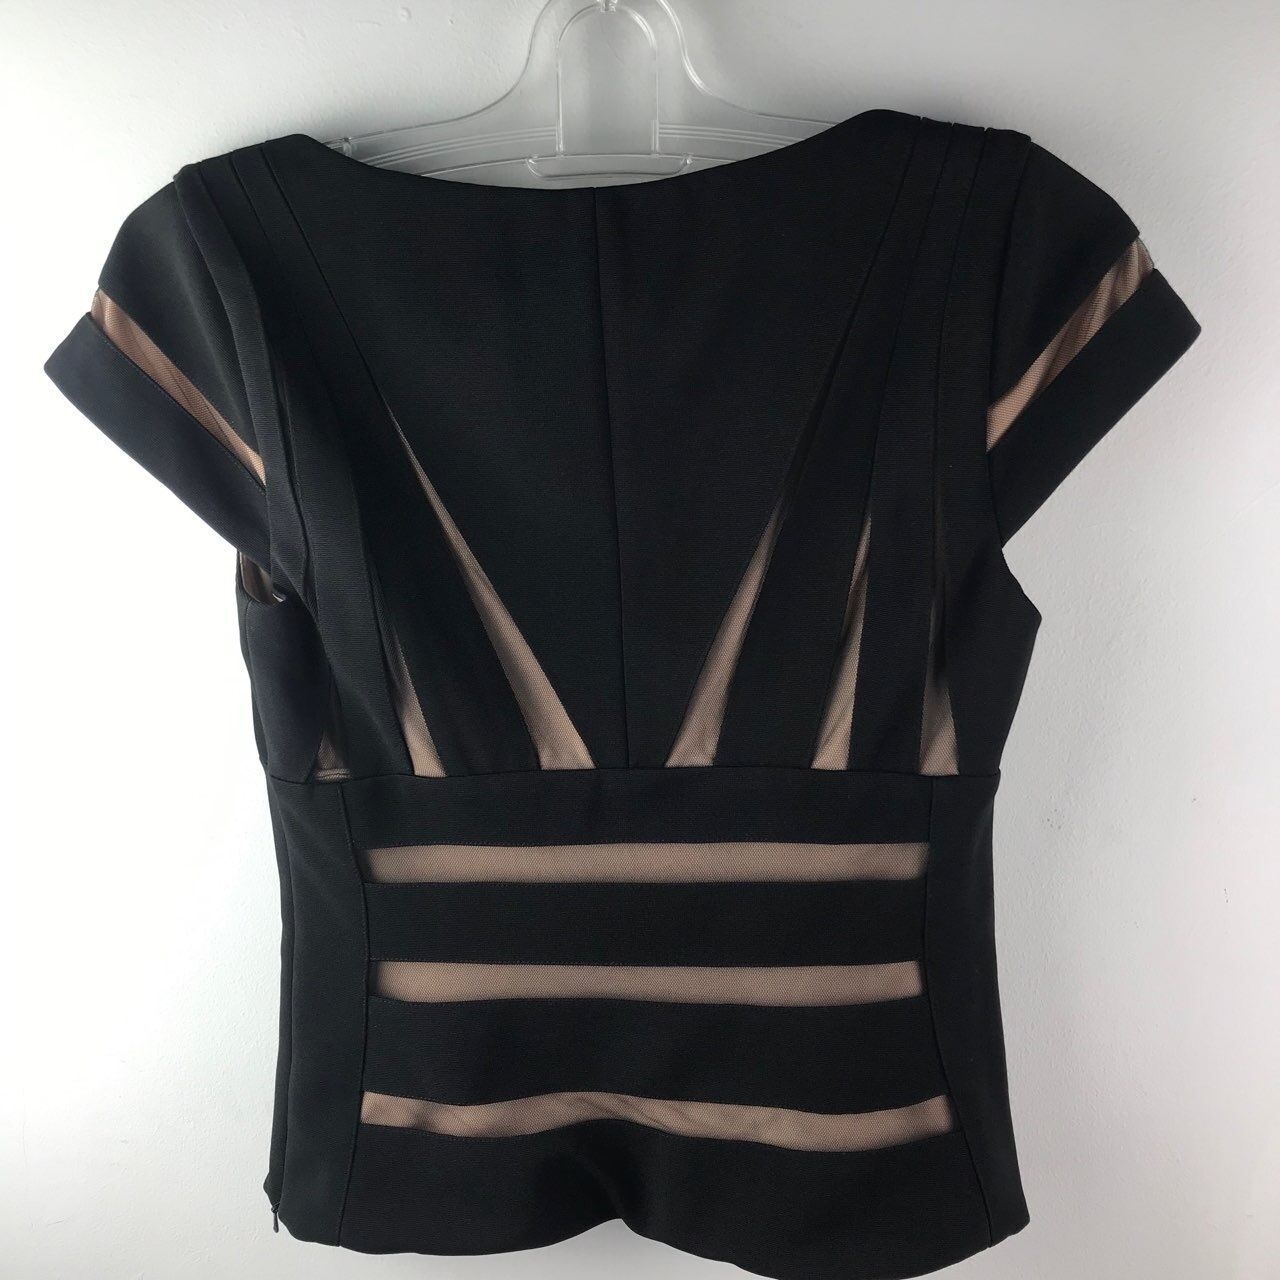 Guess Black Nude Blouse